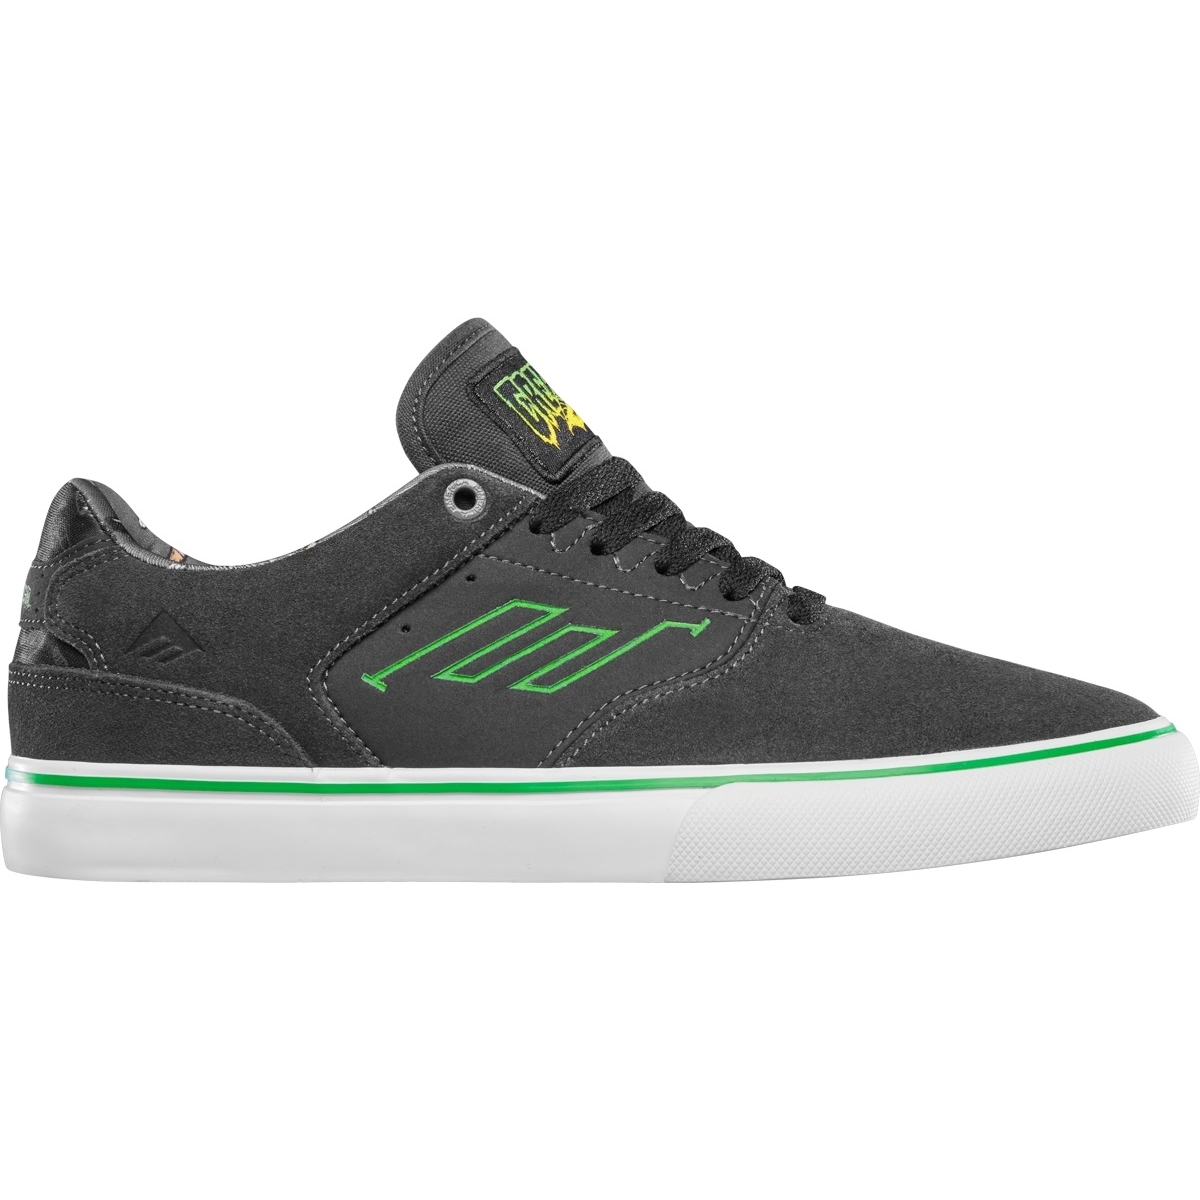 The Low Vulc X Creature (Charcoal)